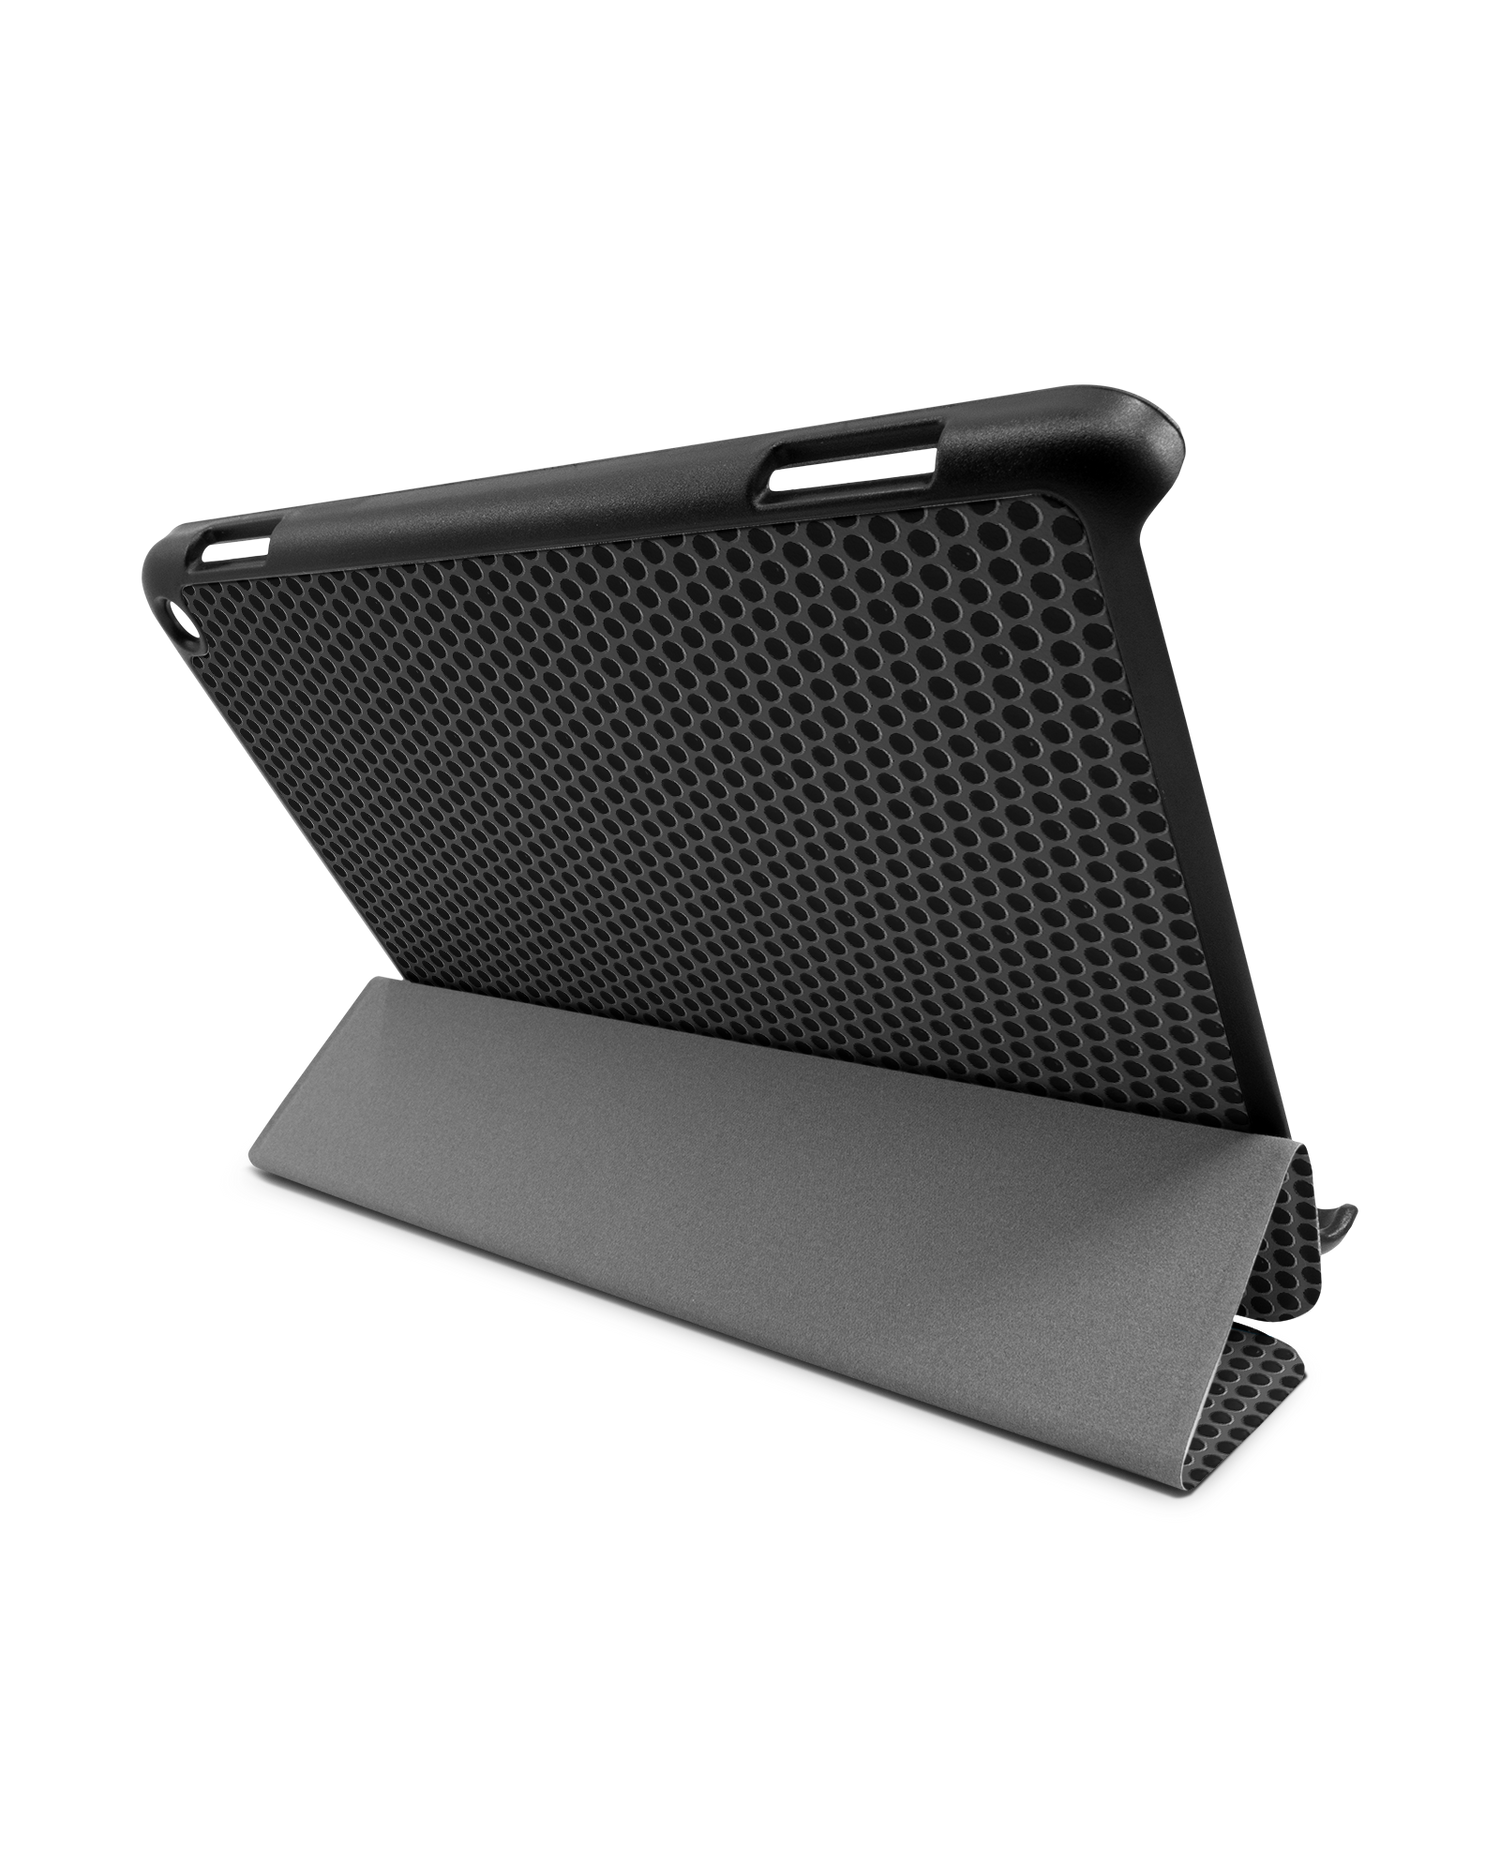 Carbon II Tablet Smart Case for Amazon Fire HD 8 (2022), Amazon Fire HD 8 Plus (2022), Amazon Fire HD 8 (2020), Amazon Fire HD 8 Plus (2020): Used as Stand